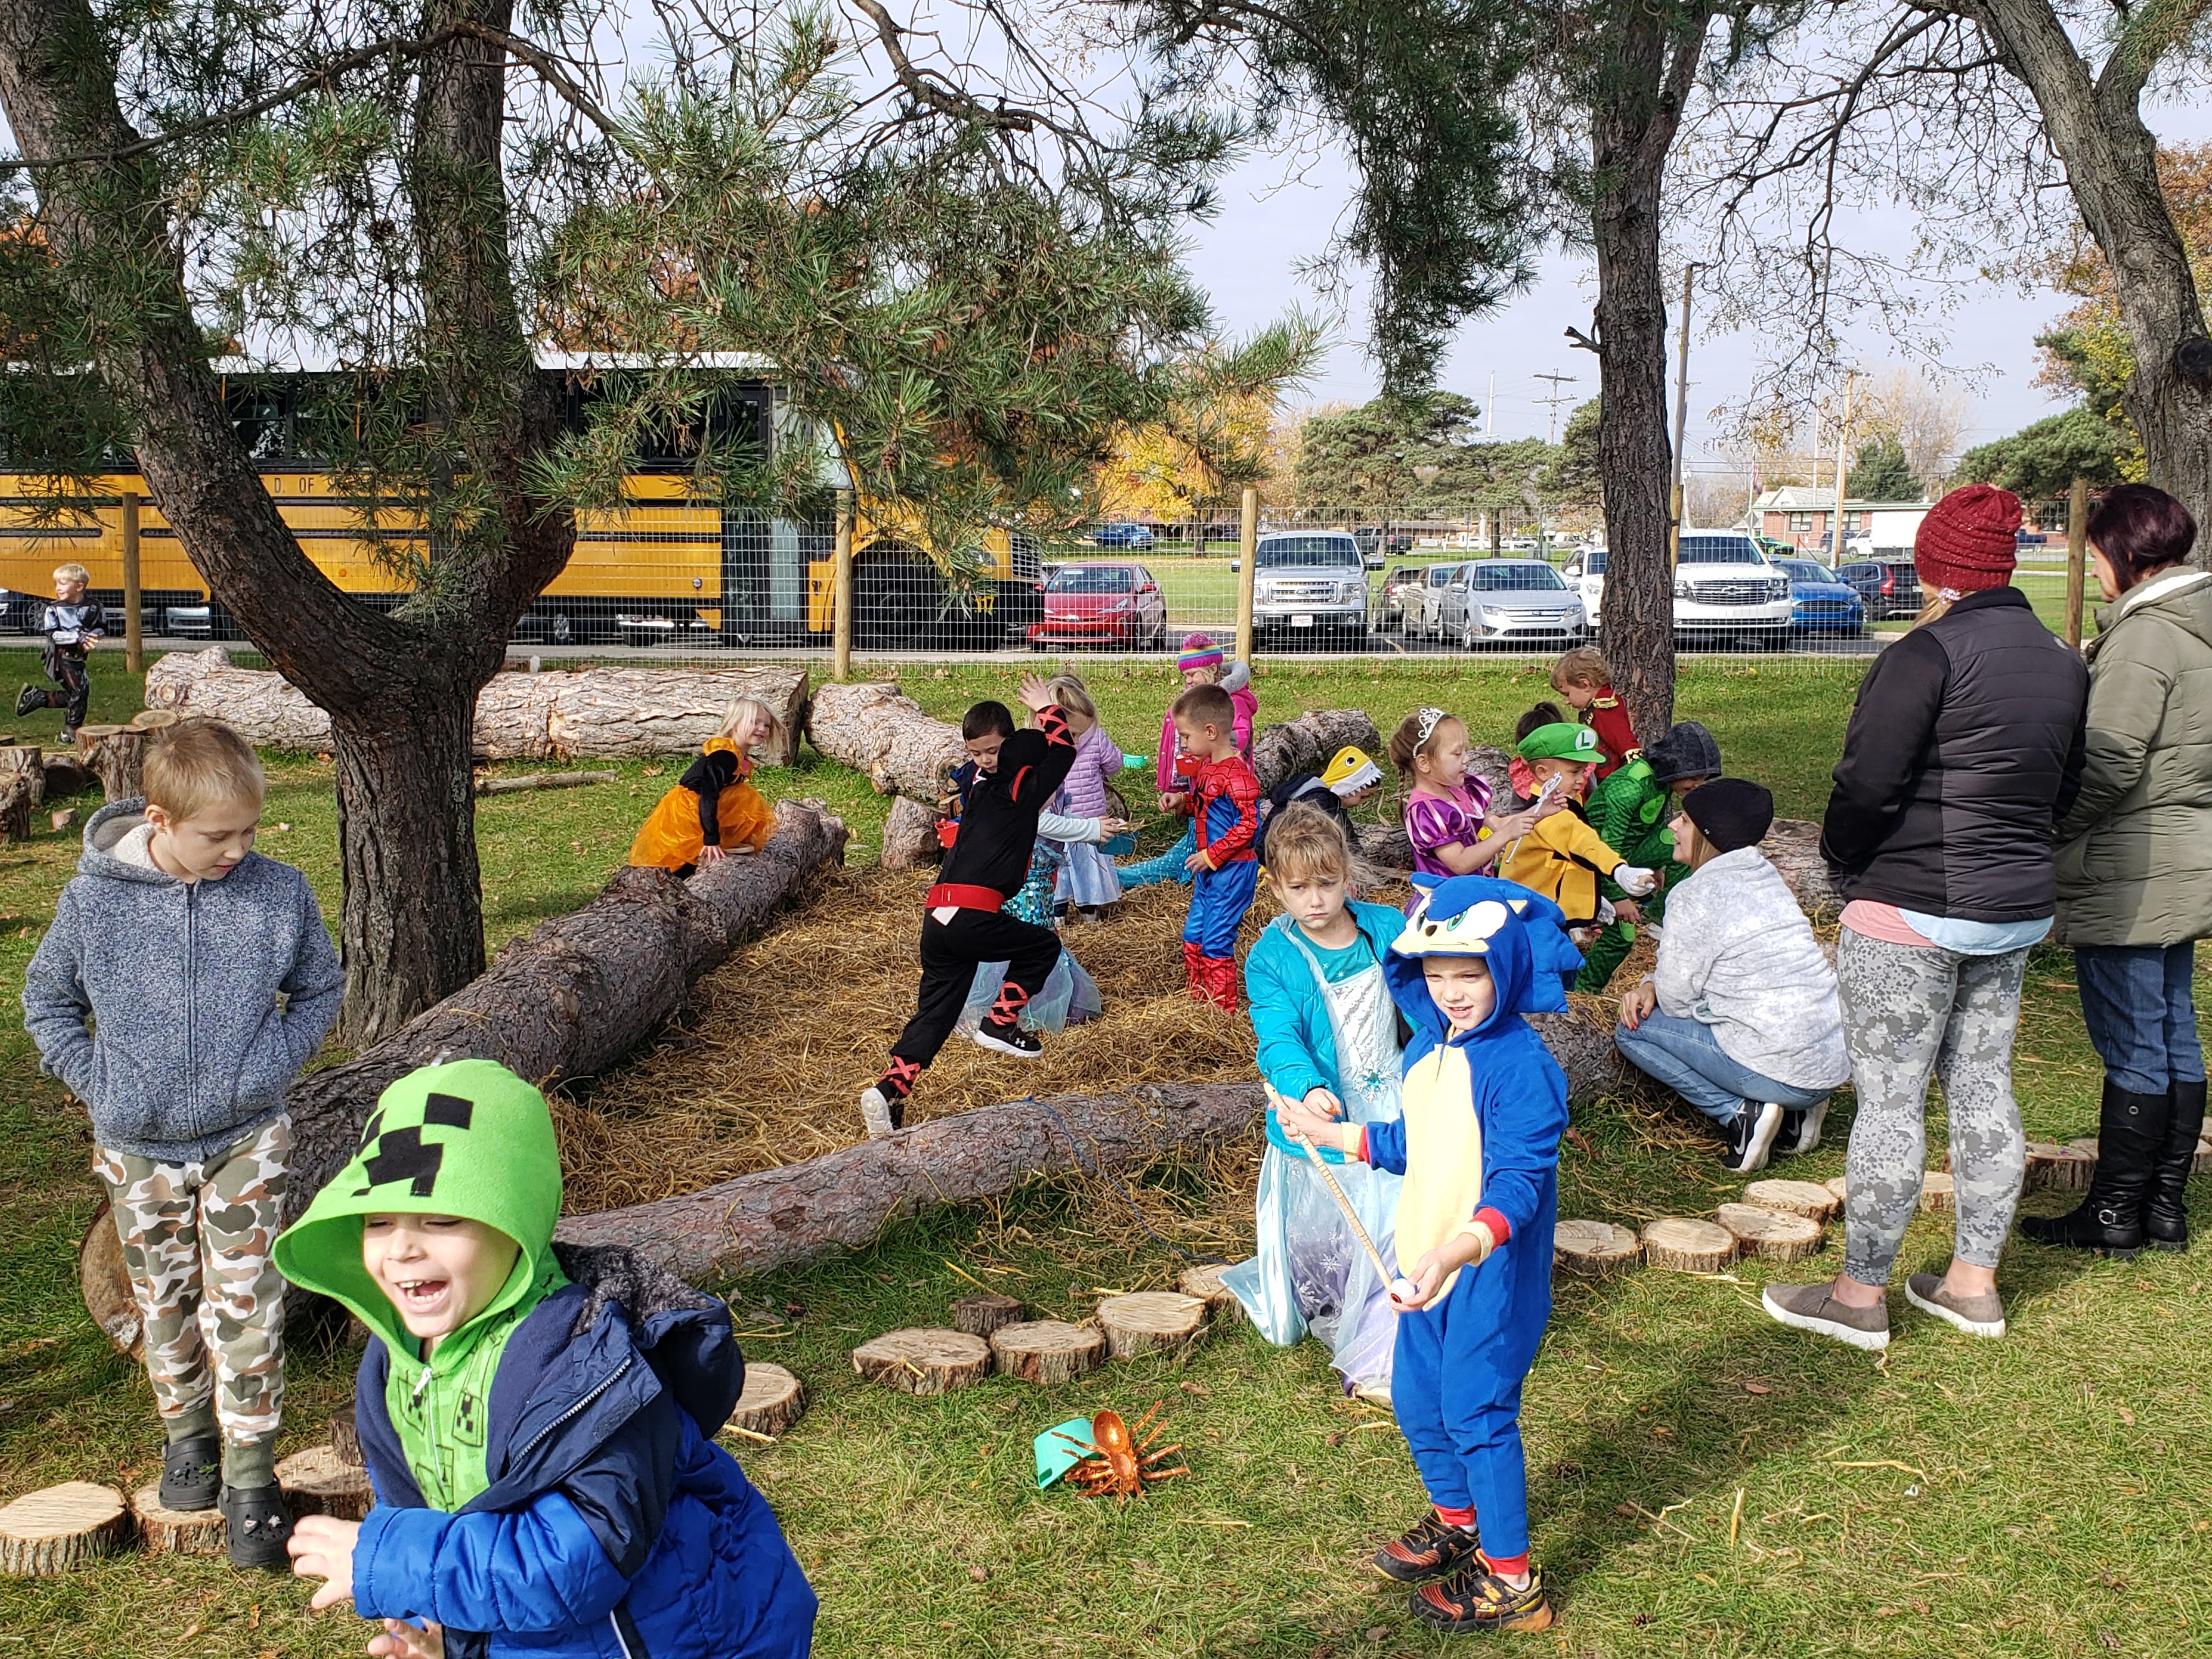 Students in Halloween costumes play outside